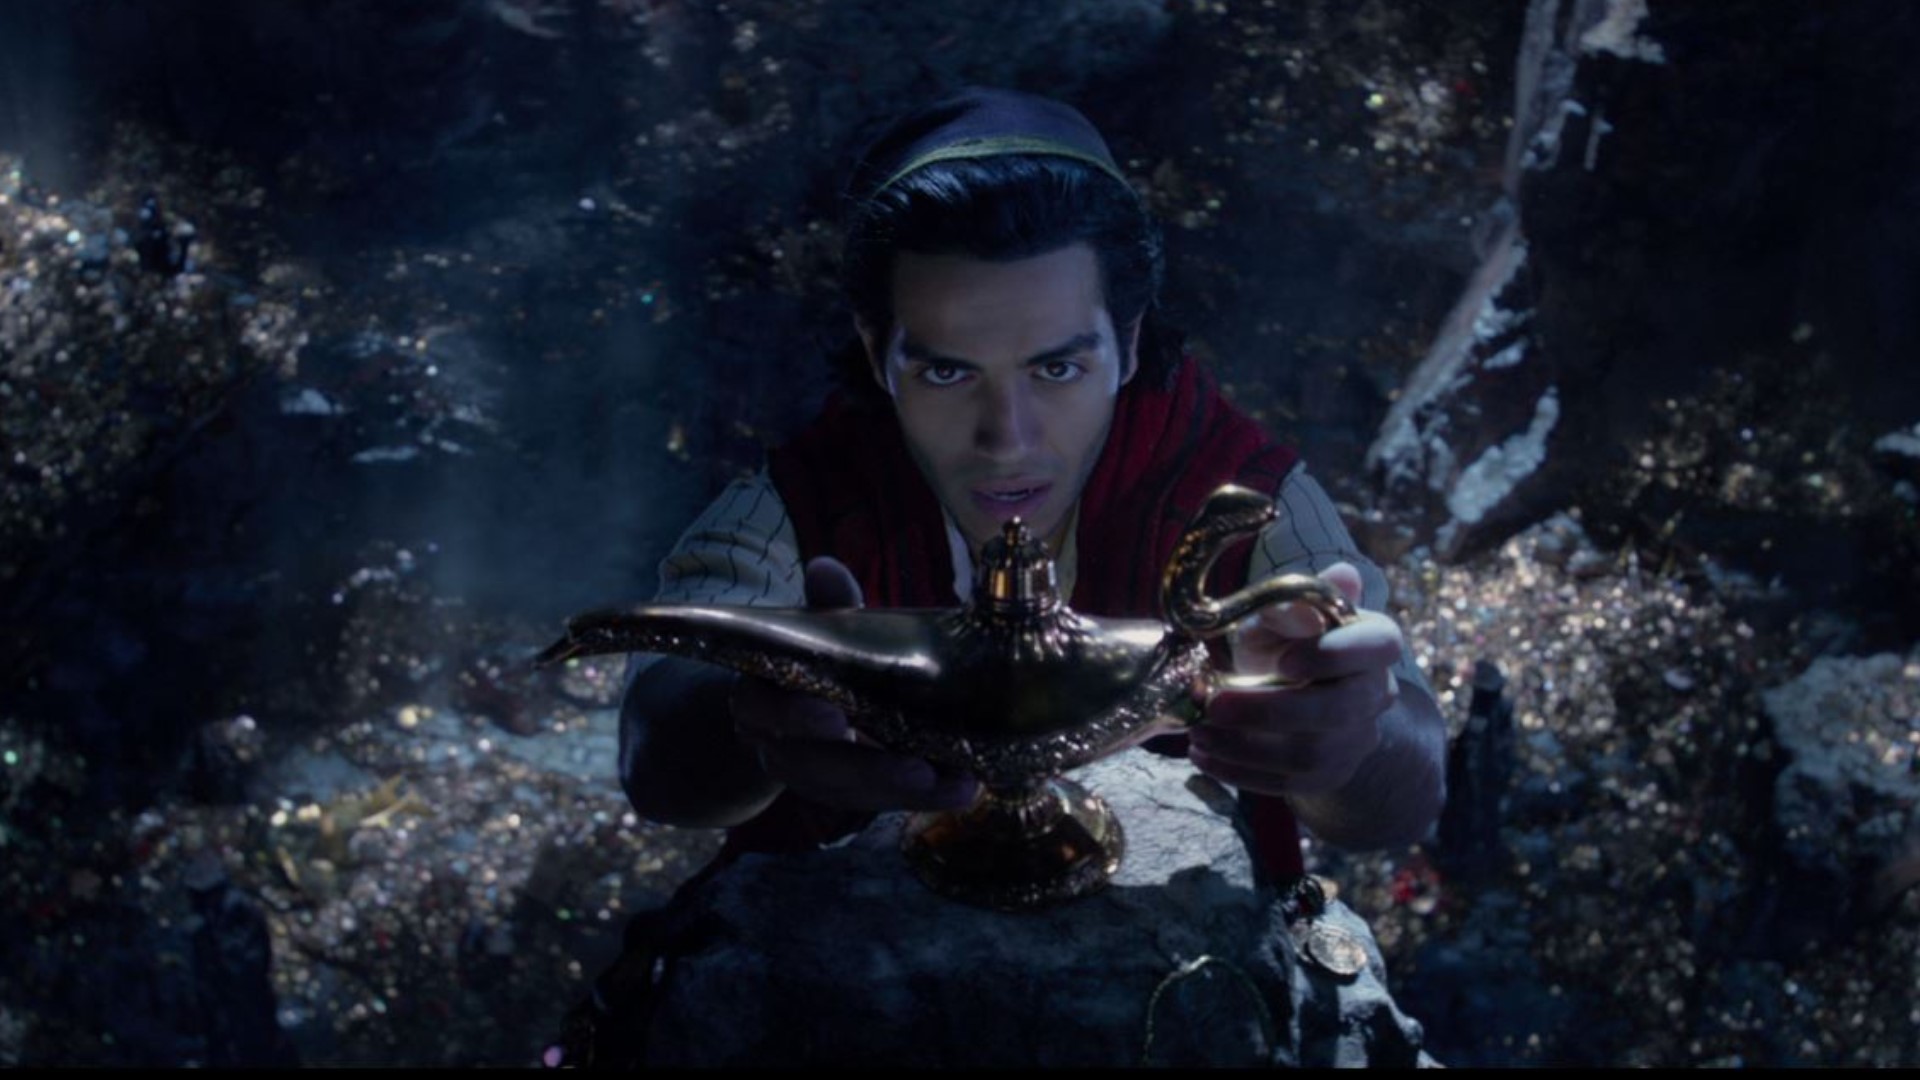 The Live Action Remake Of Aladdin Asked A Lot Of Its Stars